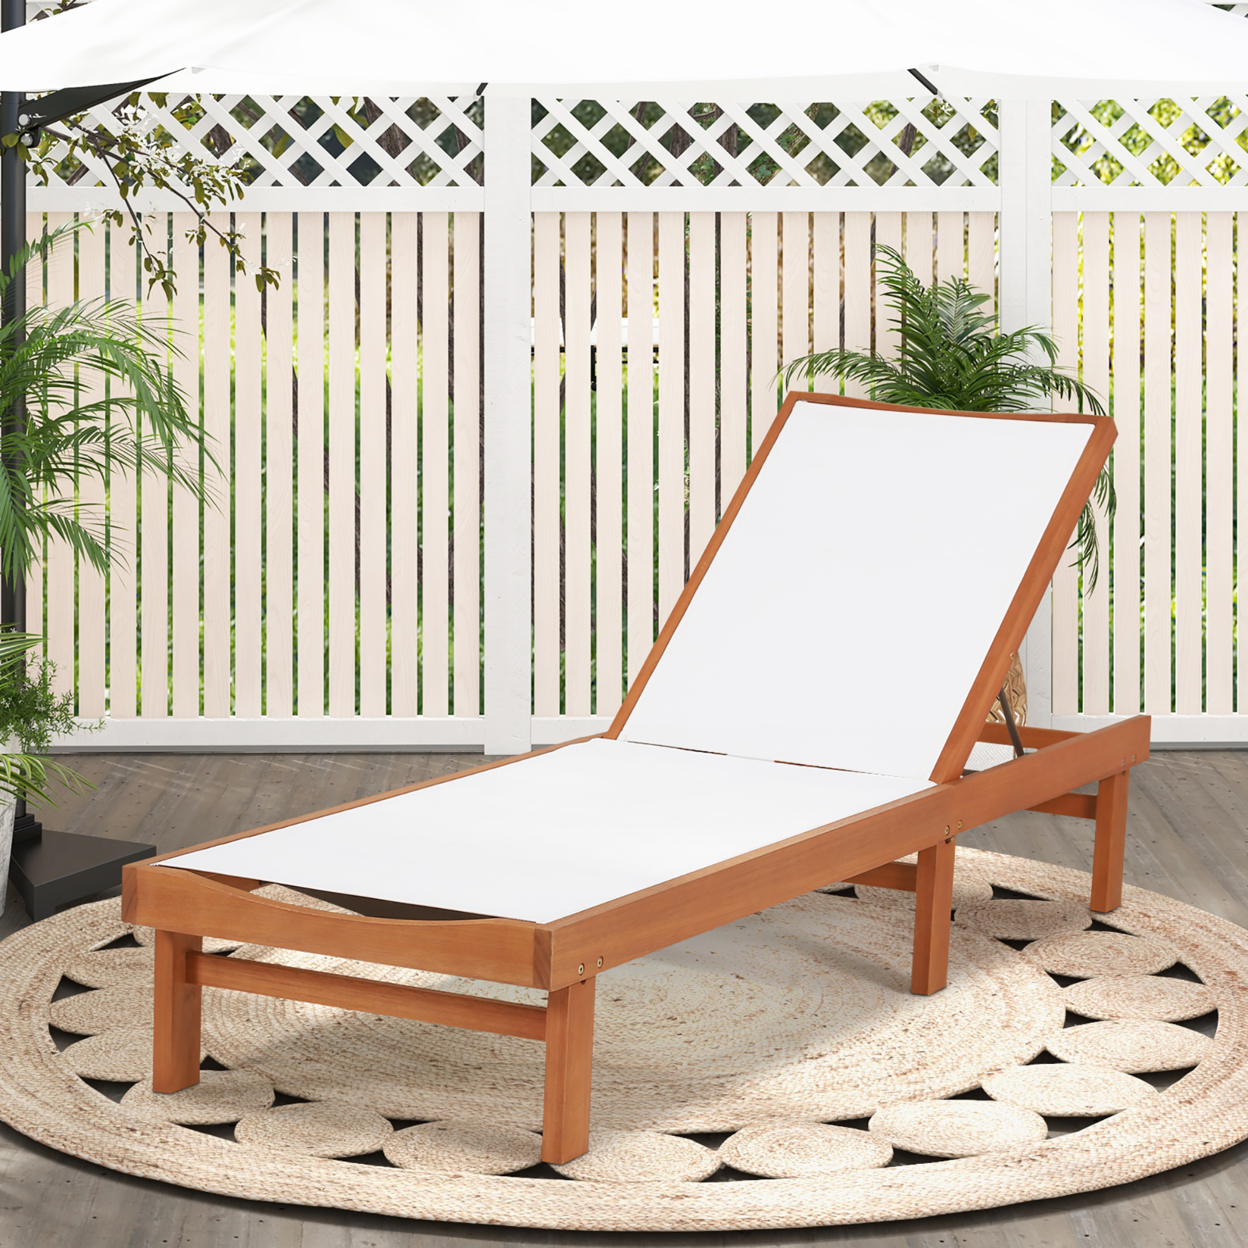 Wooden Chaise Lounge Chair Recliner Patio Outdoor W/ Adjustable Backrest